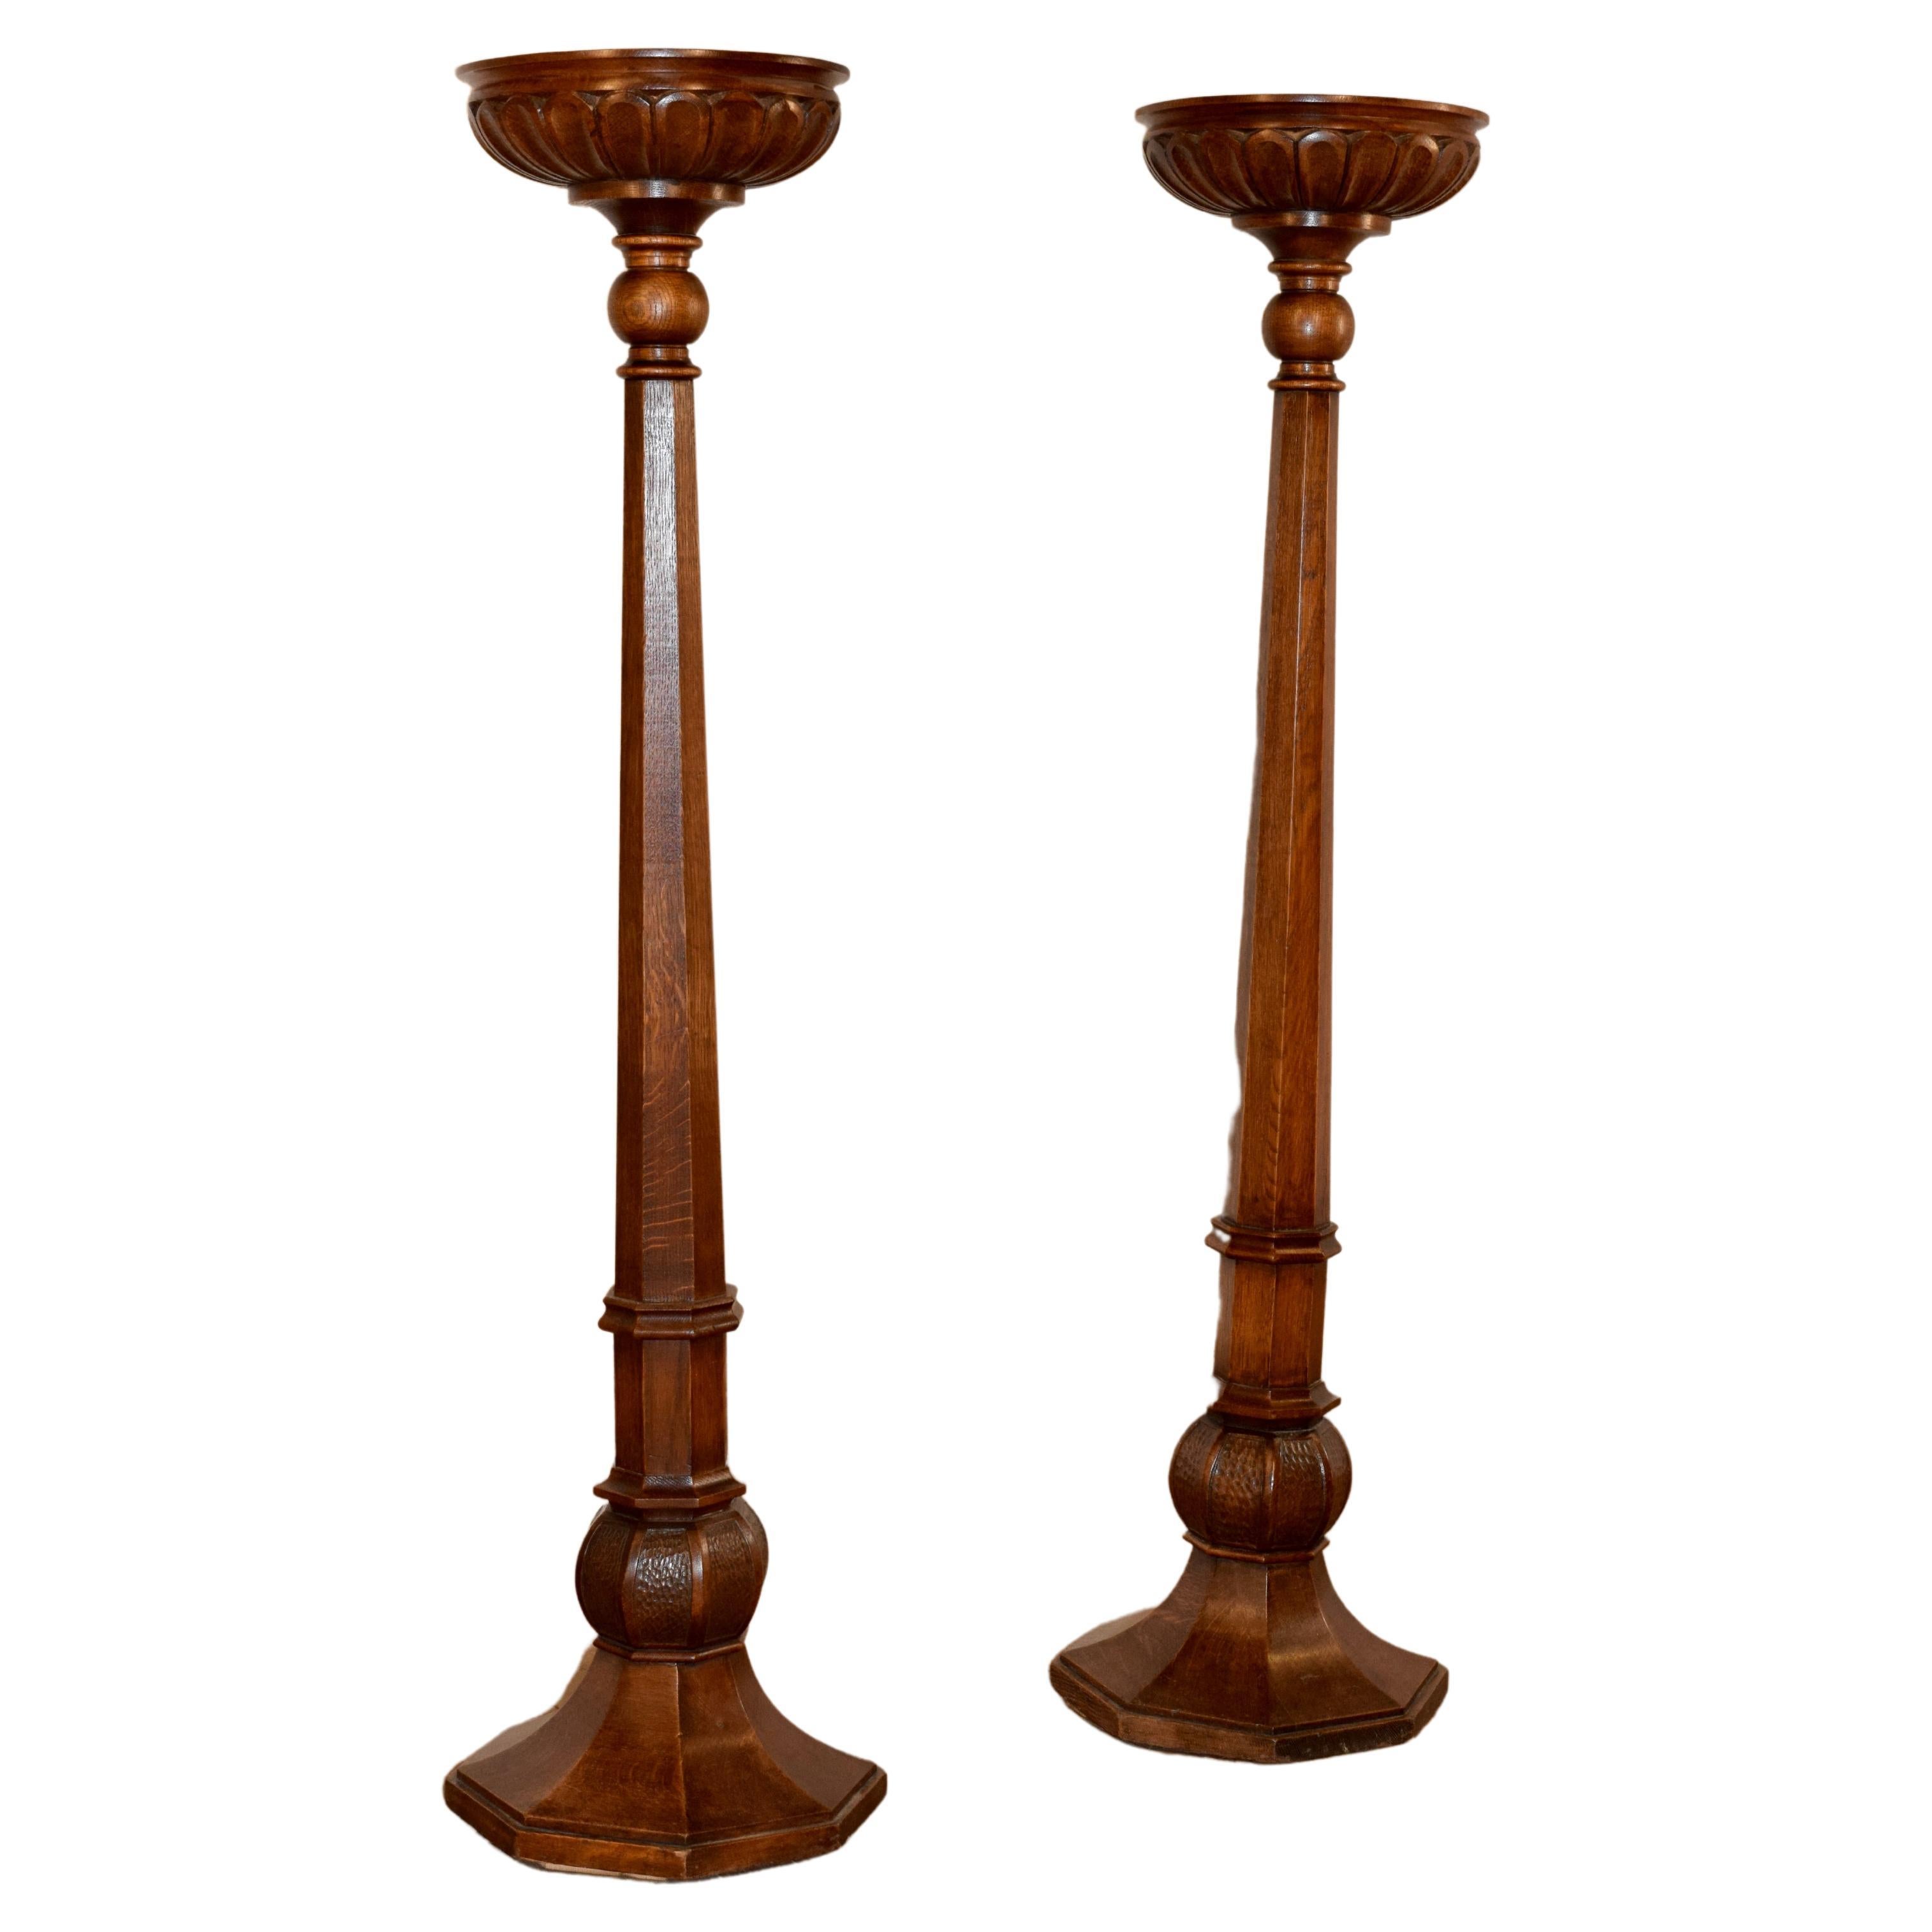 Pair of 19th century English oak pillars or torchieres with lovely carved tops over faceted columns and carved and faceted plinths.